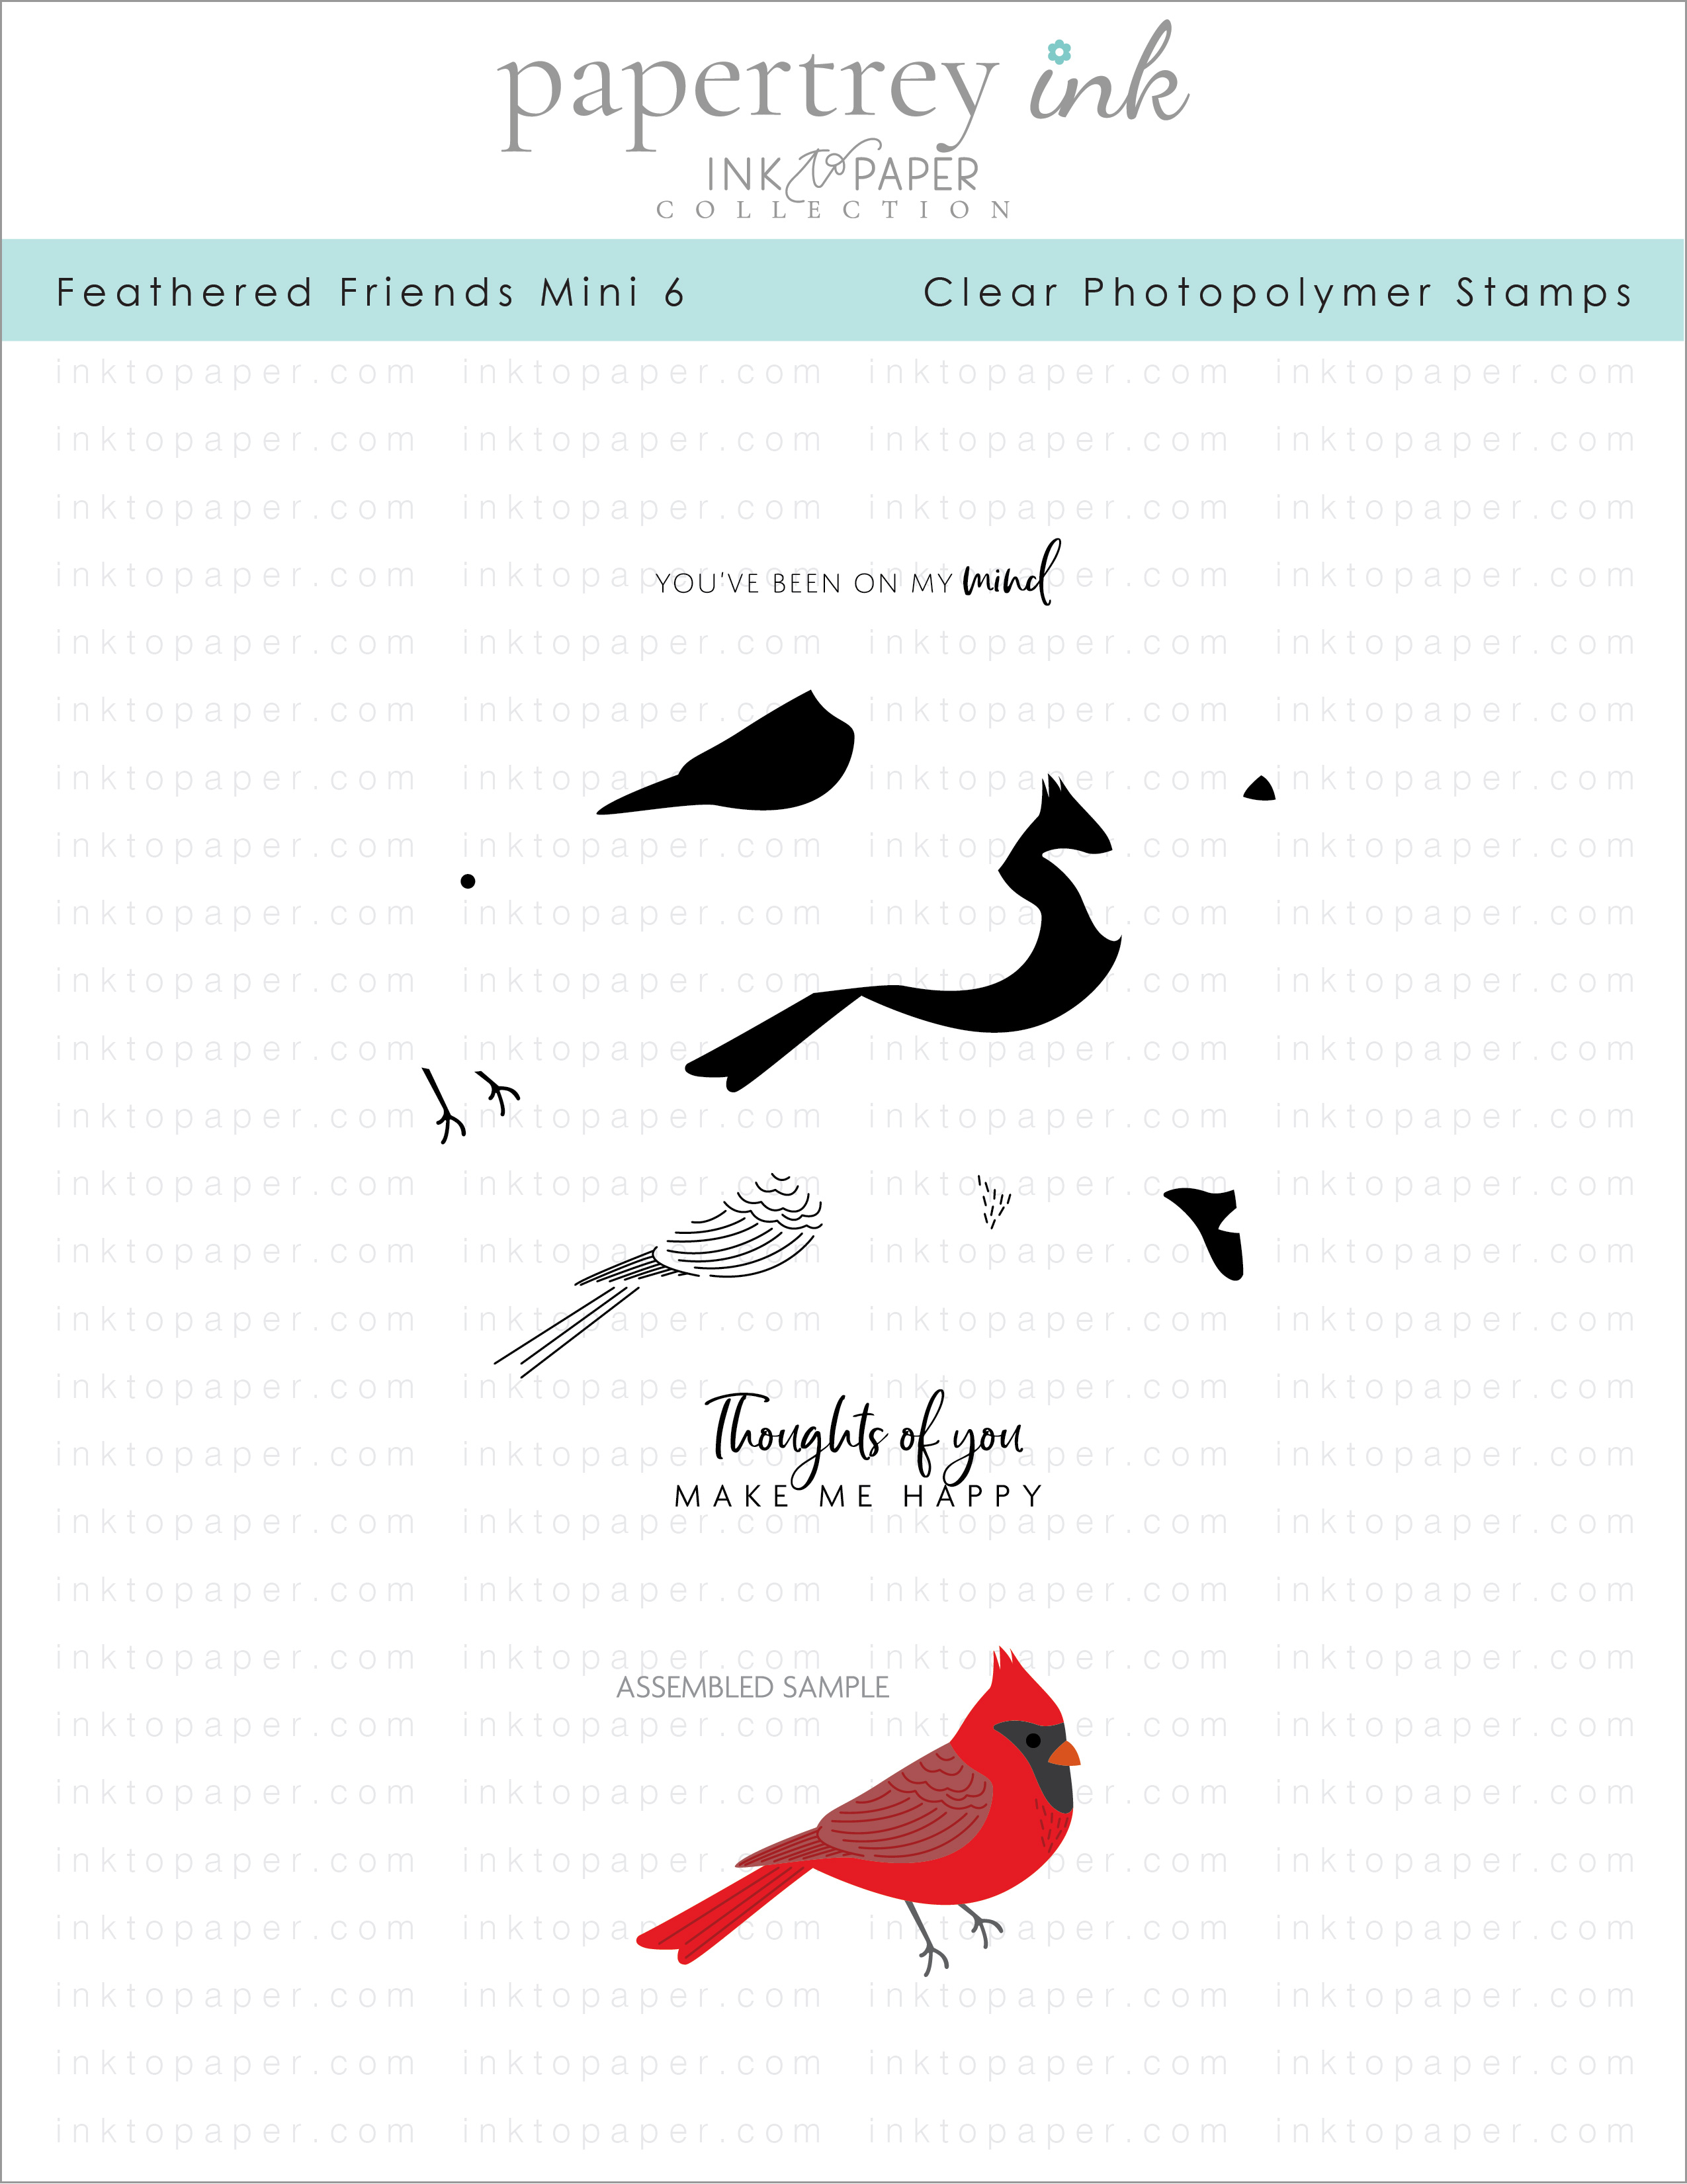 Feathered Friends Mini 6 Mini Stamp Set: Papertrey Ink